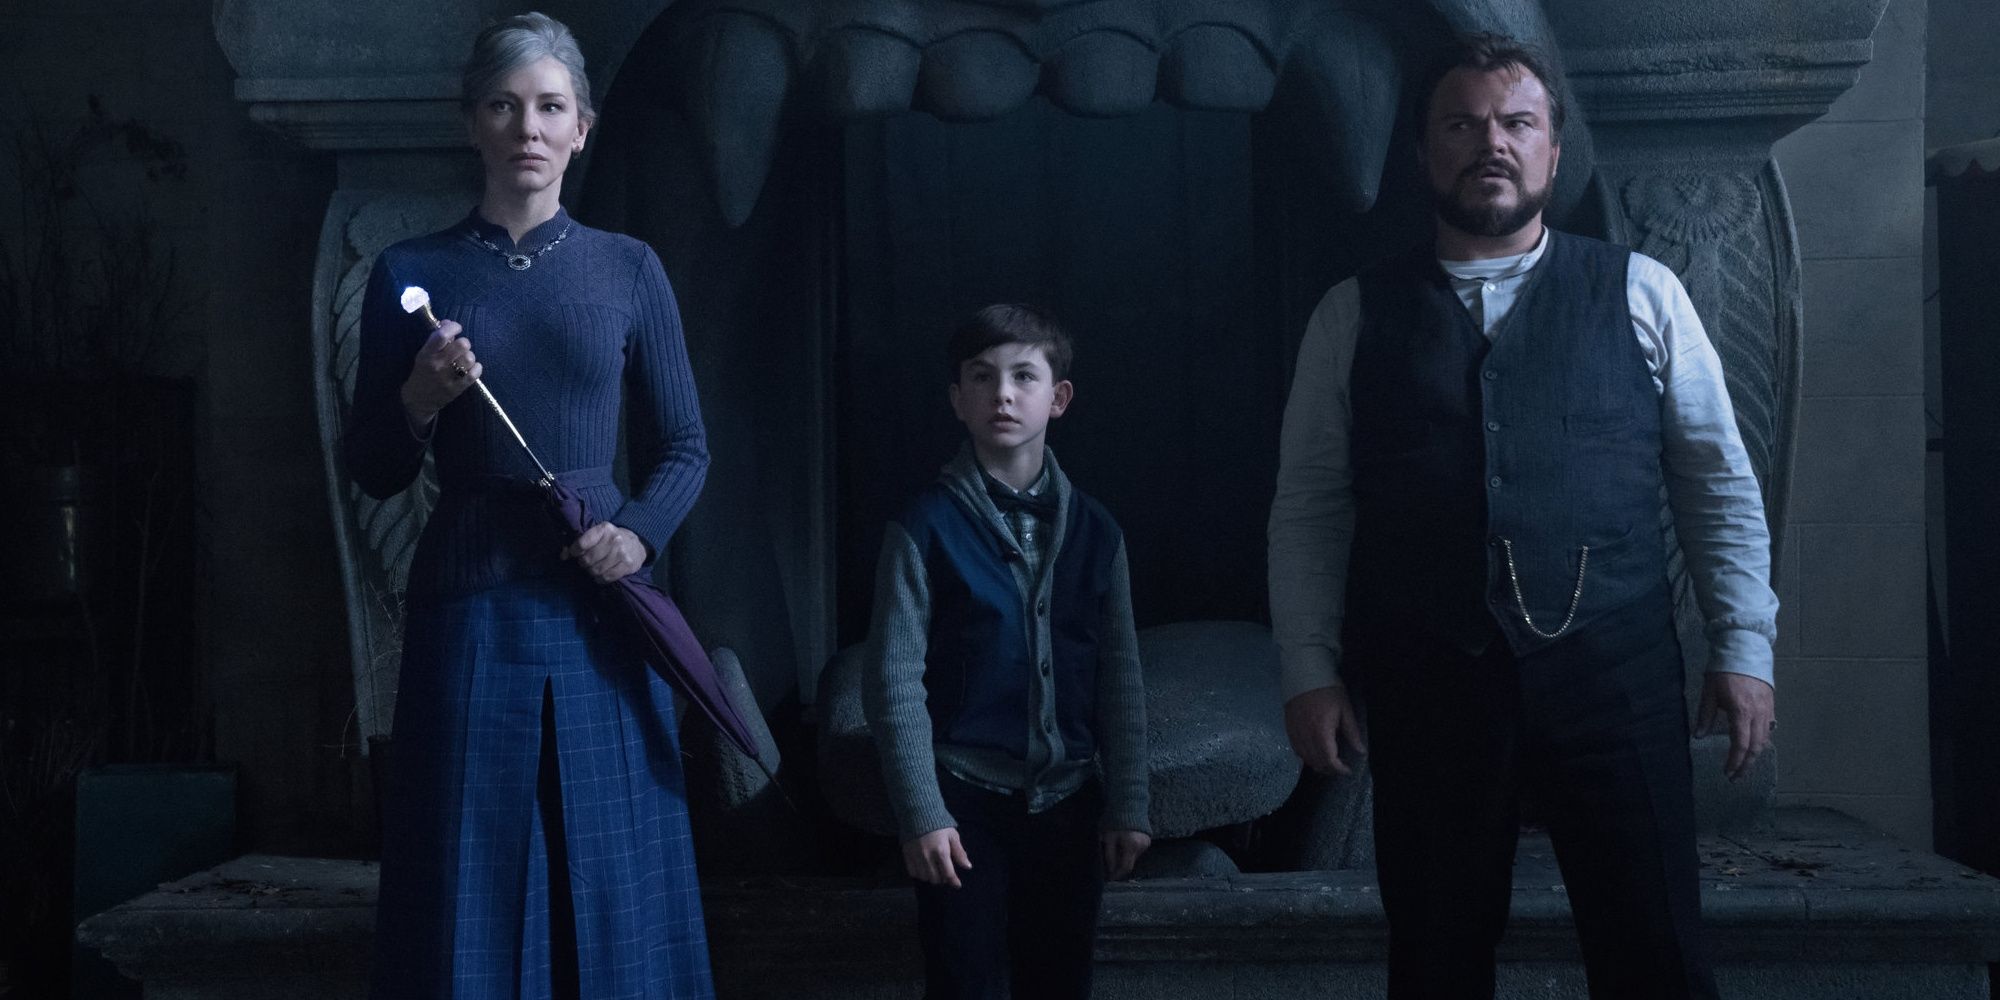 Cate Blanchett, Owen Vaccaro, and Jack Black in The House with a Clock in Its Walls